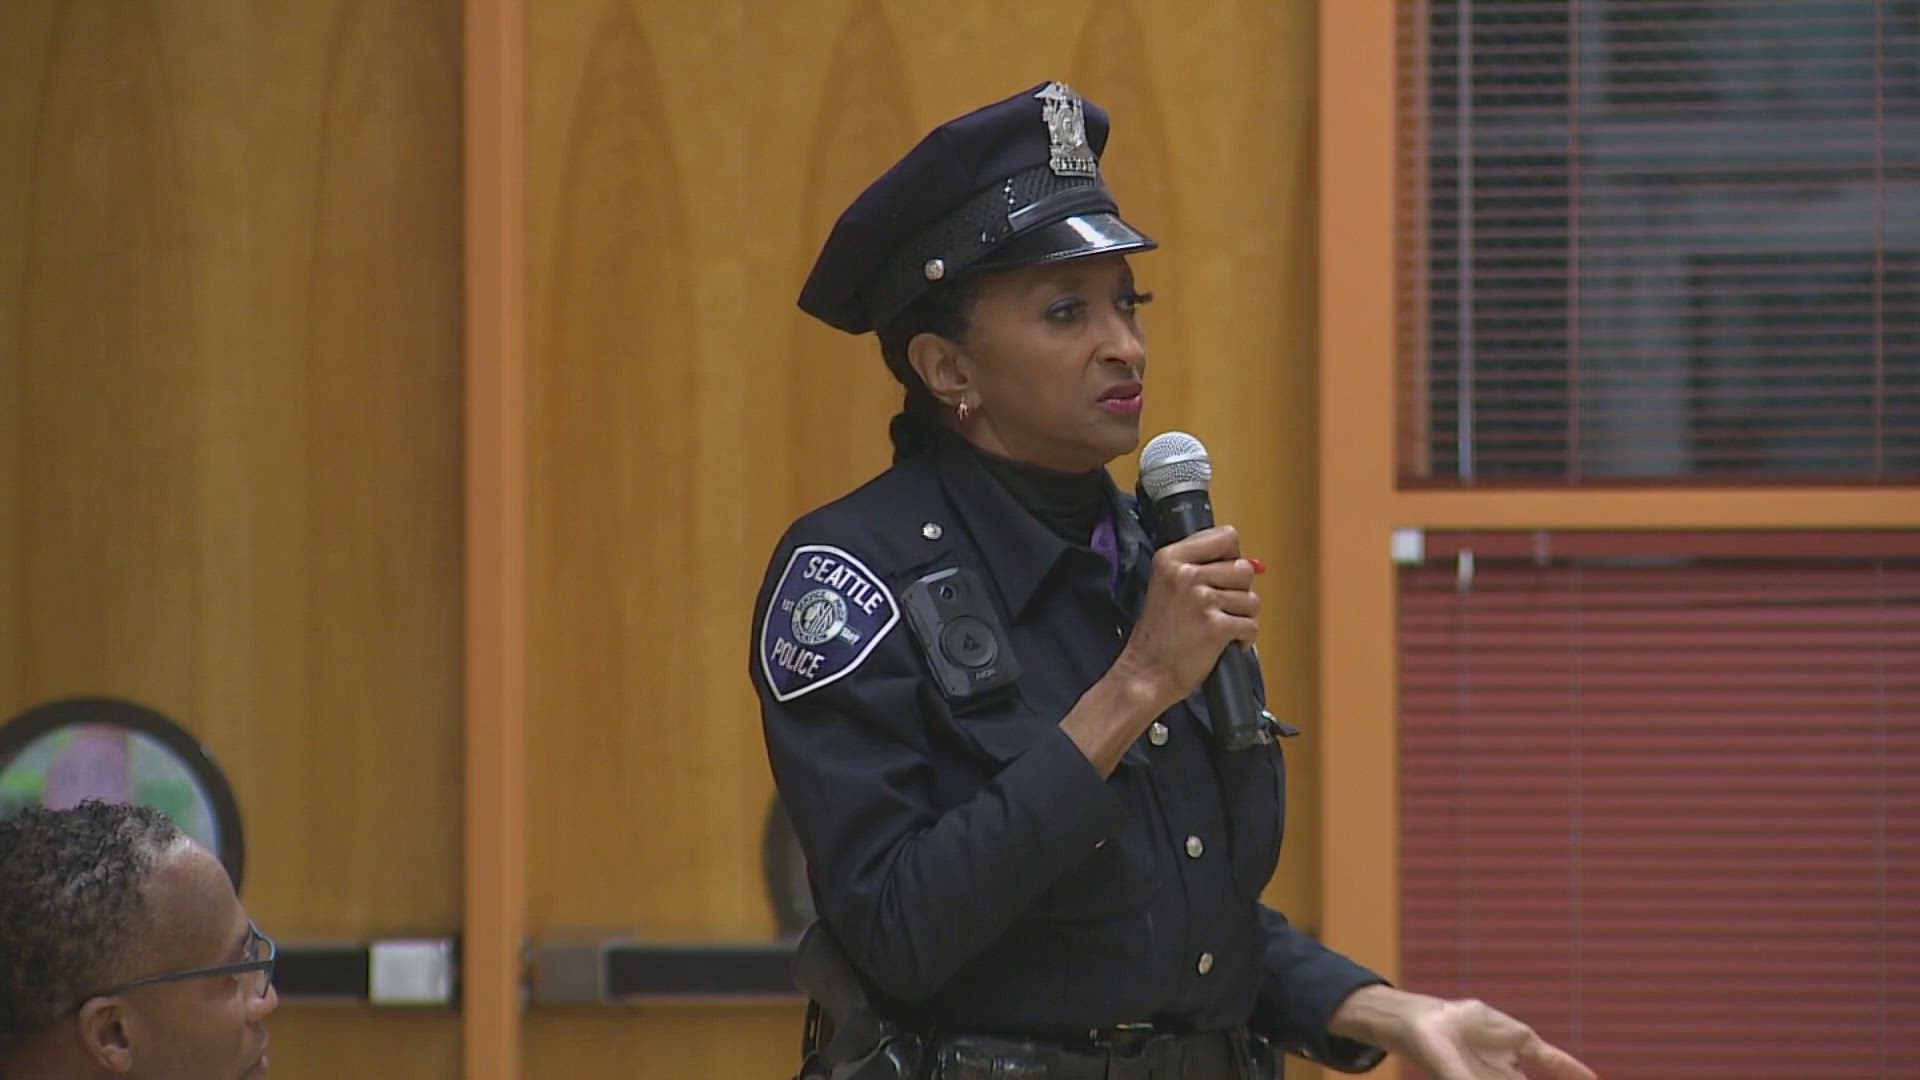 Detective Denise “Cookie” Bouldin's attorney said this has been going on her entire career and has a significant impact on her emotional and physical well-being.